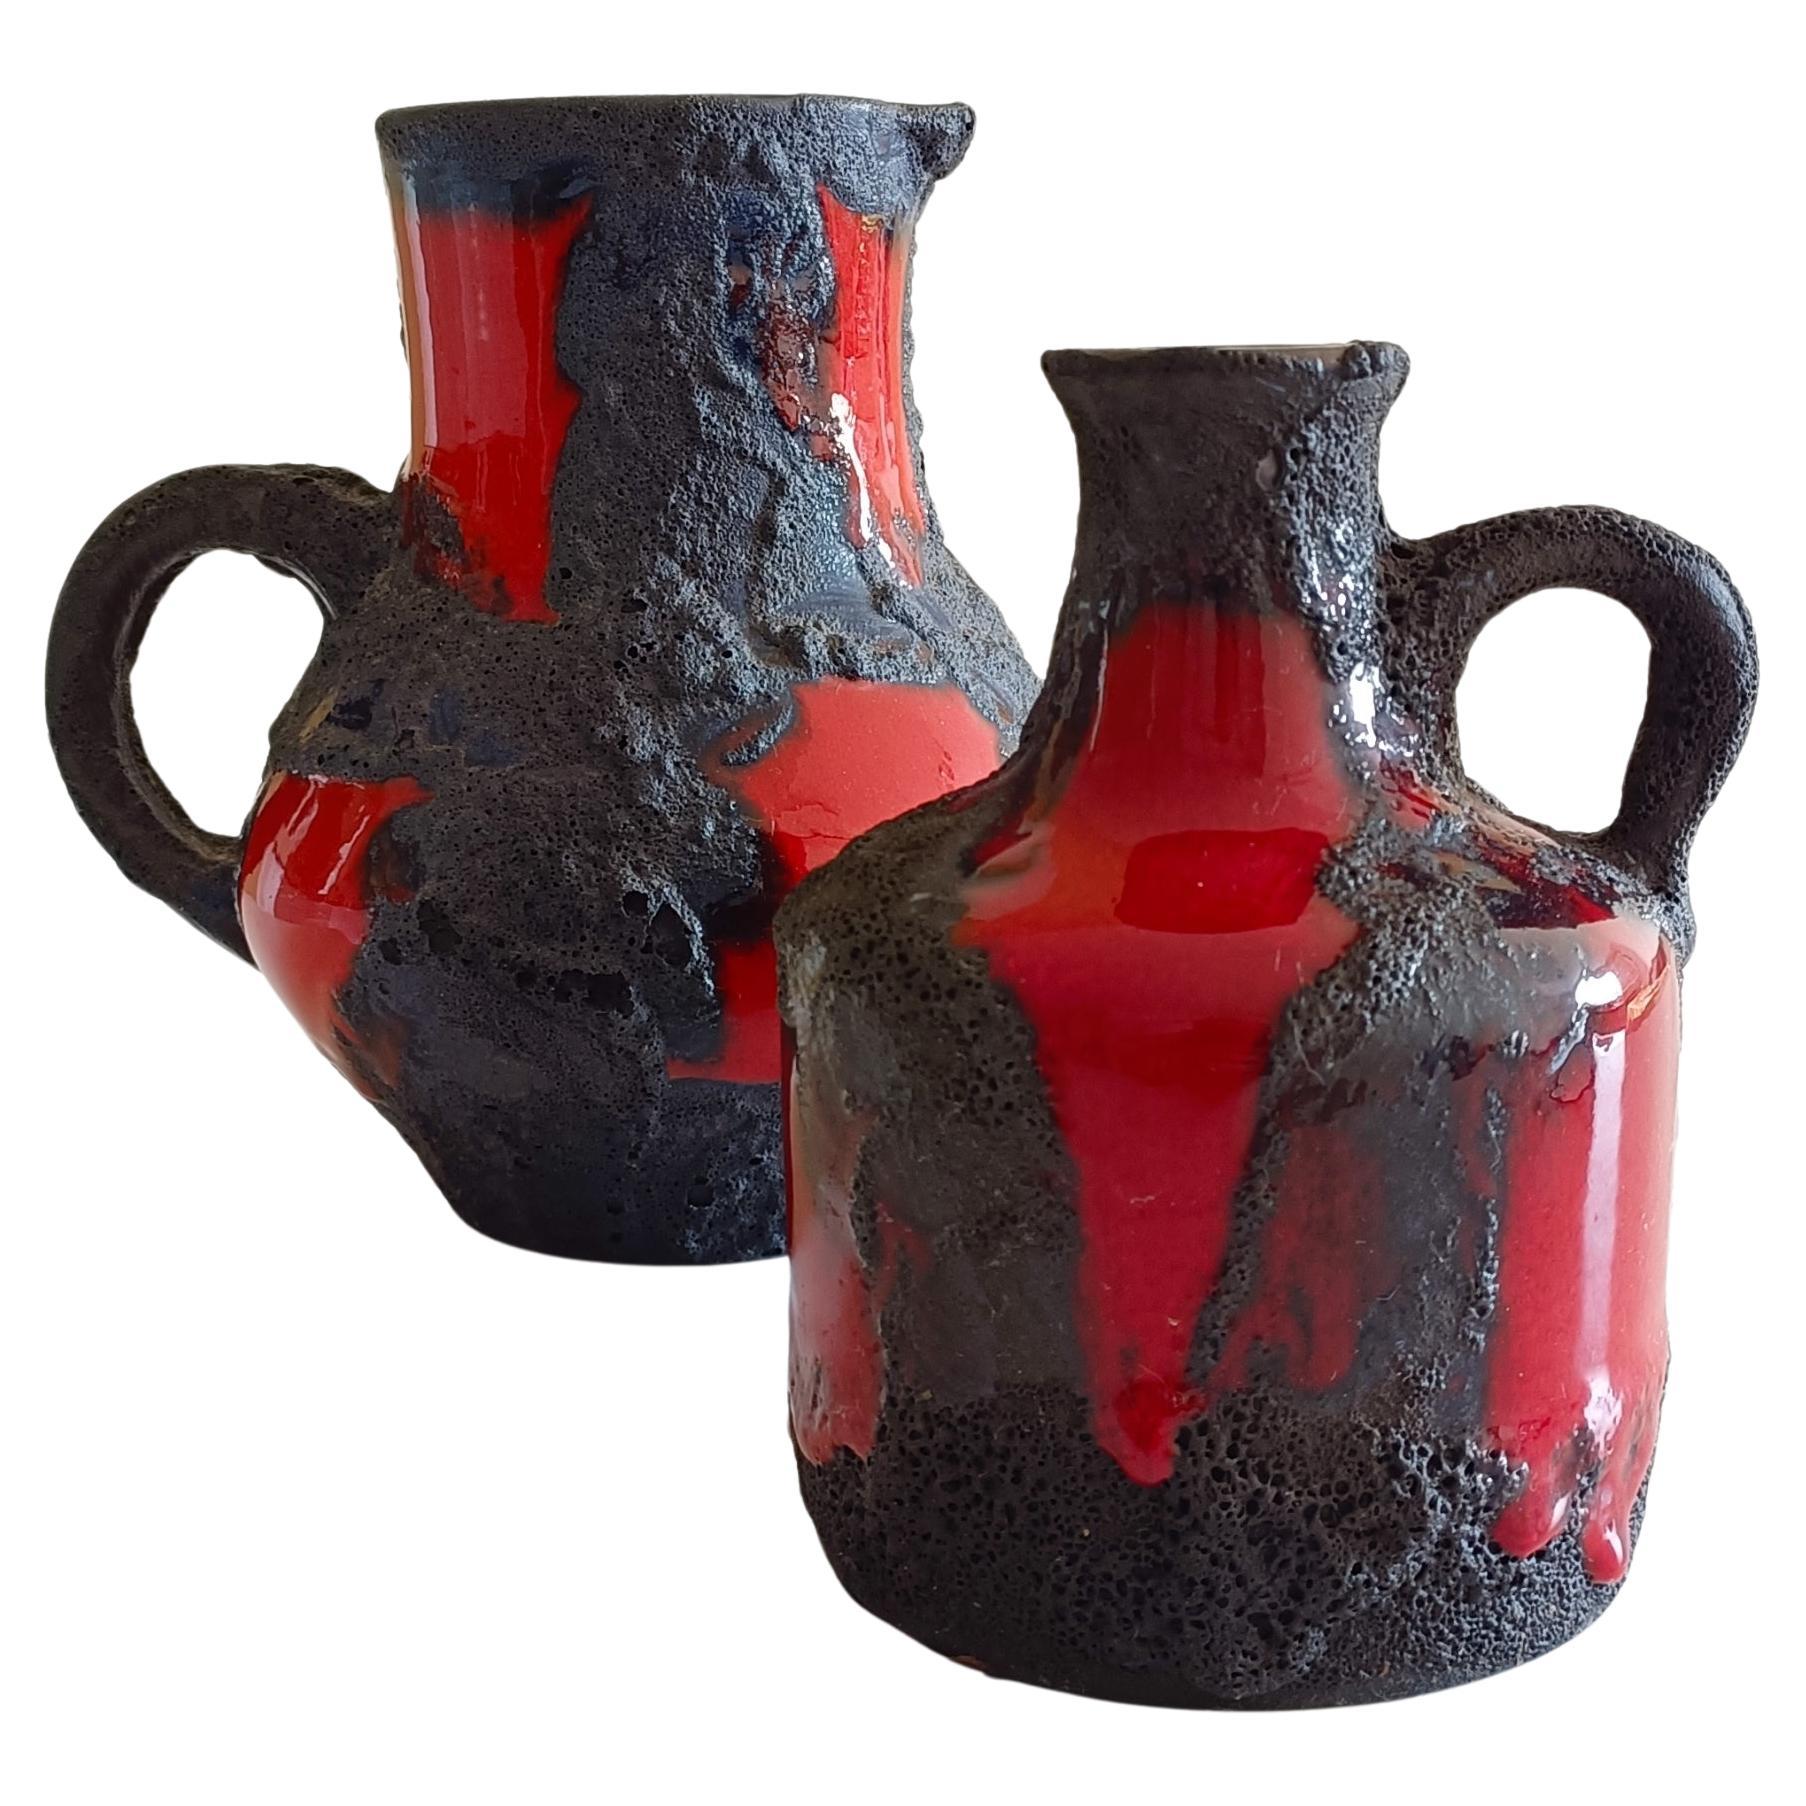 Step into a world of timeless elegance and bold artistic expression with this stunning pair of vintage Mid-Century Fat Lava ceramic jugs by Marei Keramiks. Handmade in West Germany circa the 1960s, these exquisite pieces are a testament to the